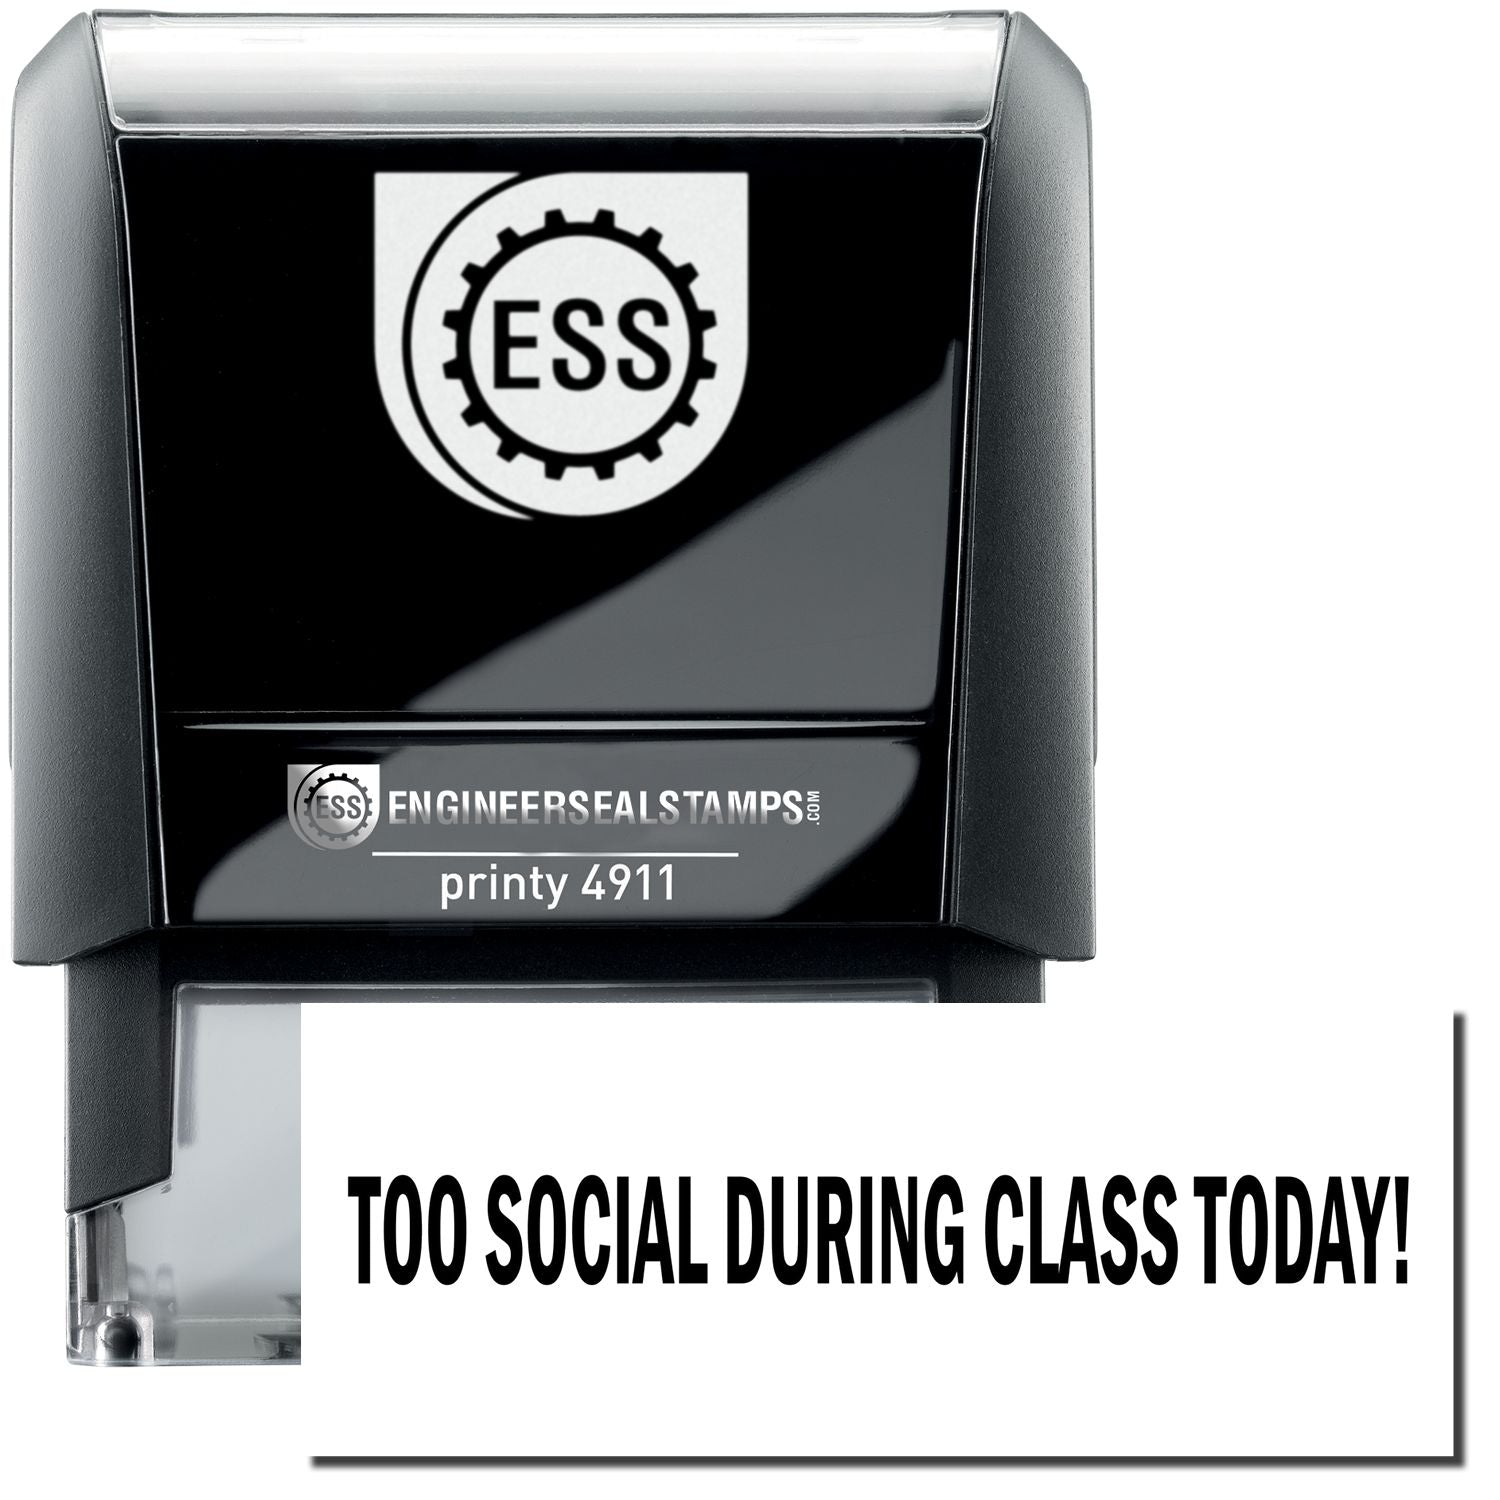 A self-inking stamp with a stamped image showing how the text "TOO SOCIAL DURING CLASS TODAY!" is displayed after stamping.